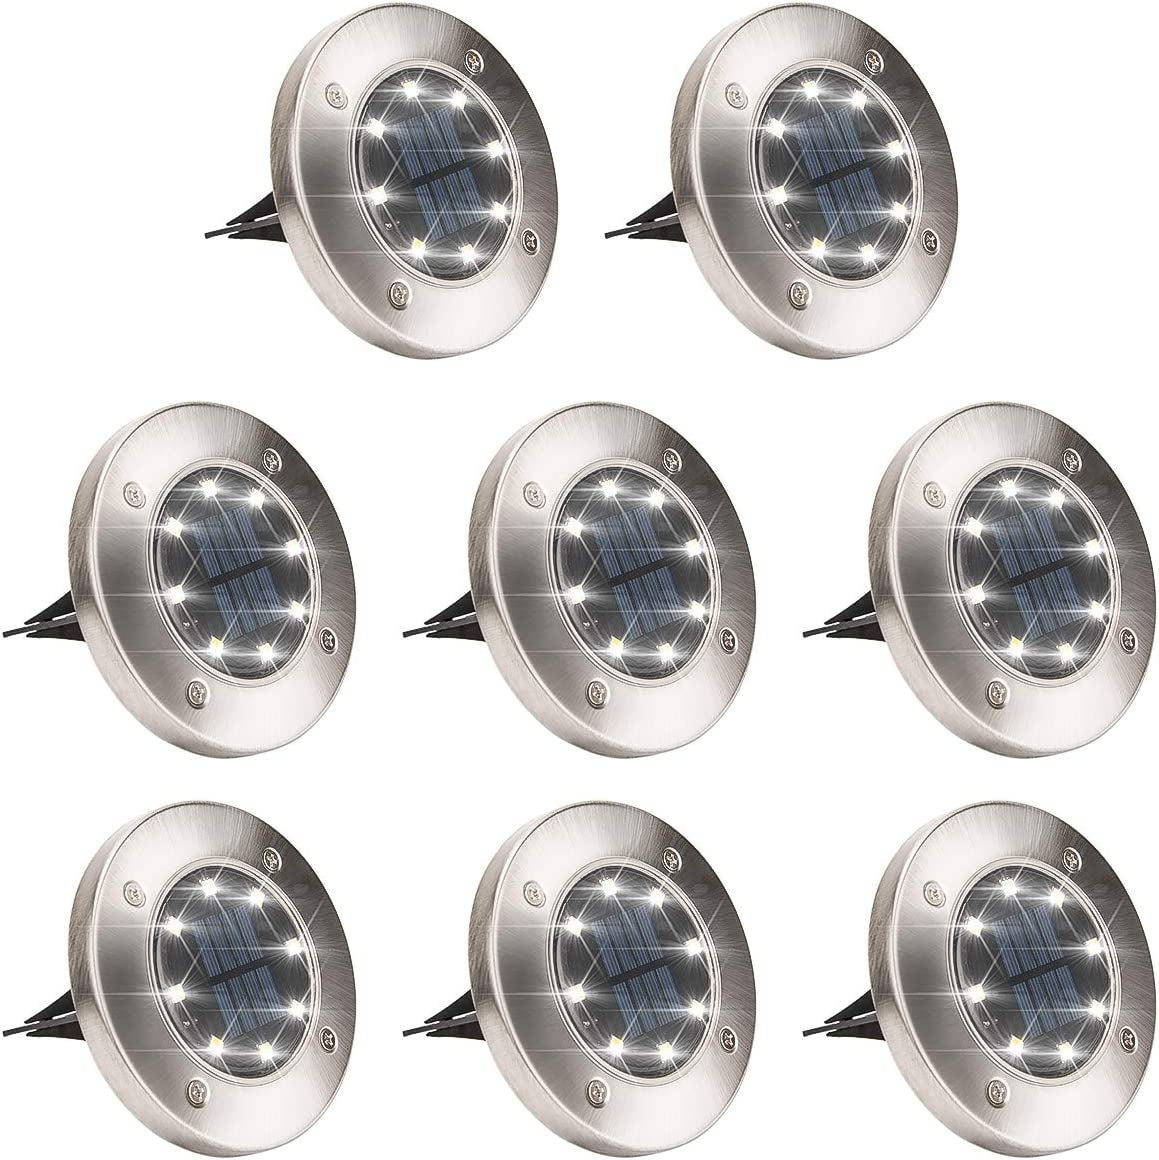 GIGALUMI, GIGALUMI 8 Pack Solar Ground Lights, 8 LED Solar Powered Disk Lights Outdoor Waterproof Garden Landscape Lighting for Yard Deck Lawn Patio Pathway Walkway (White)